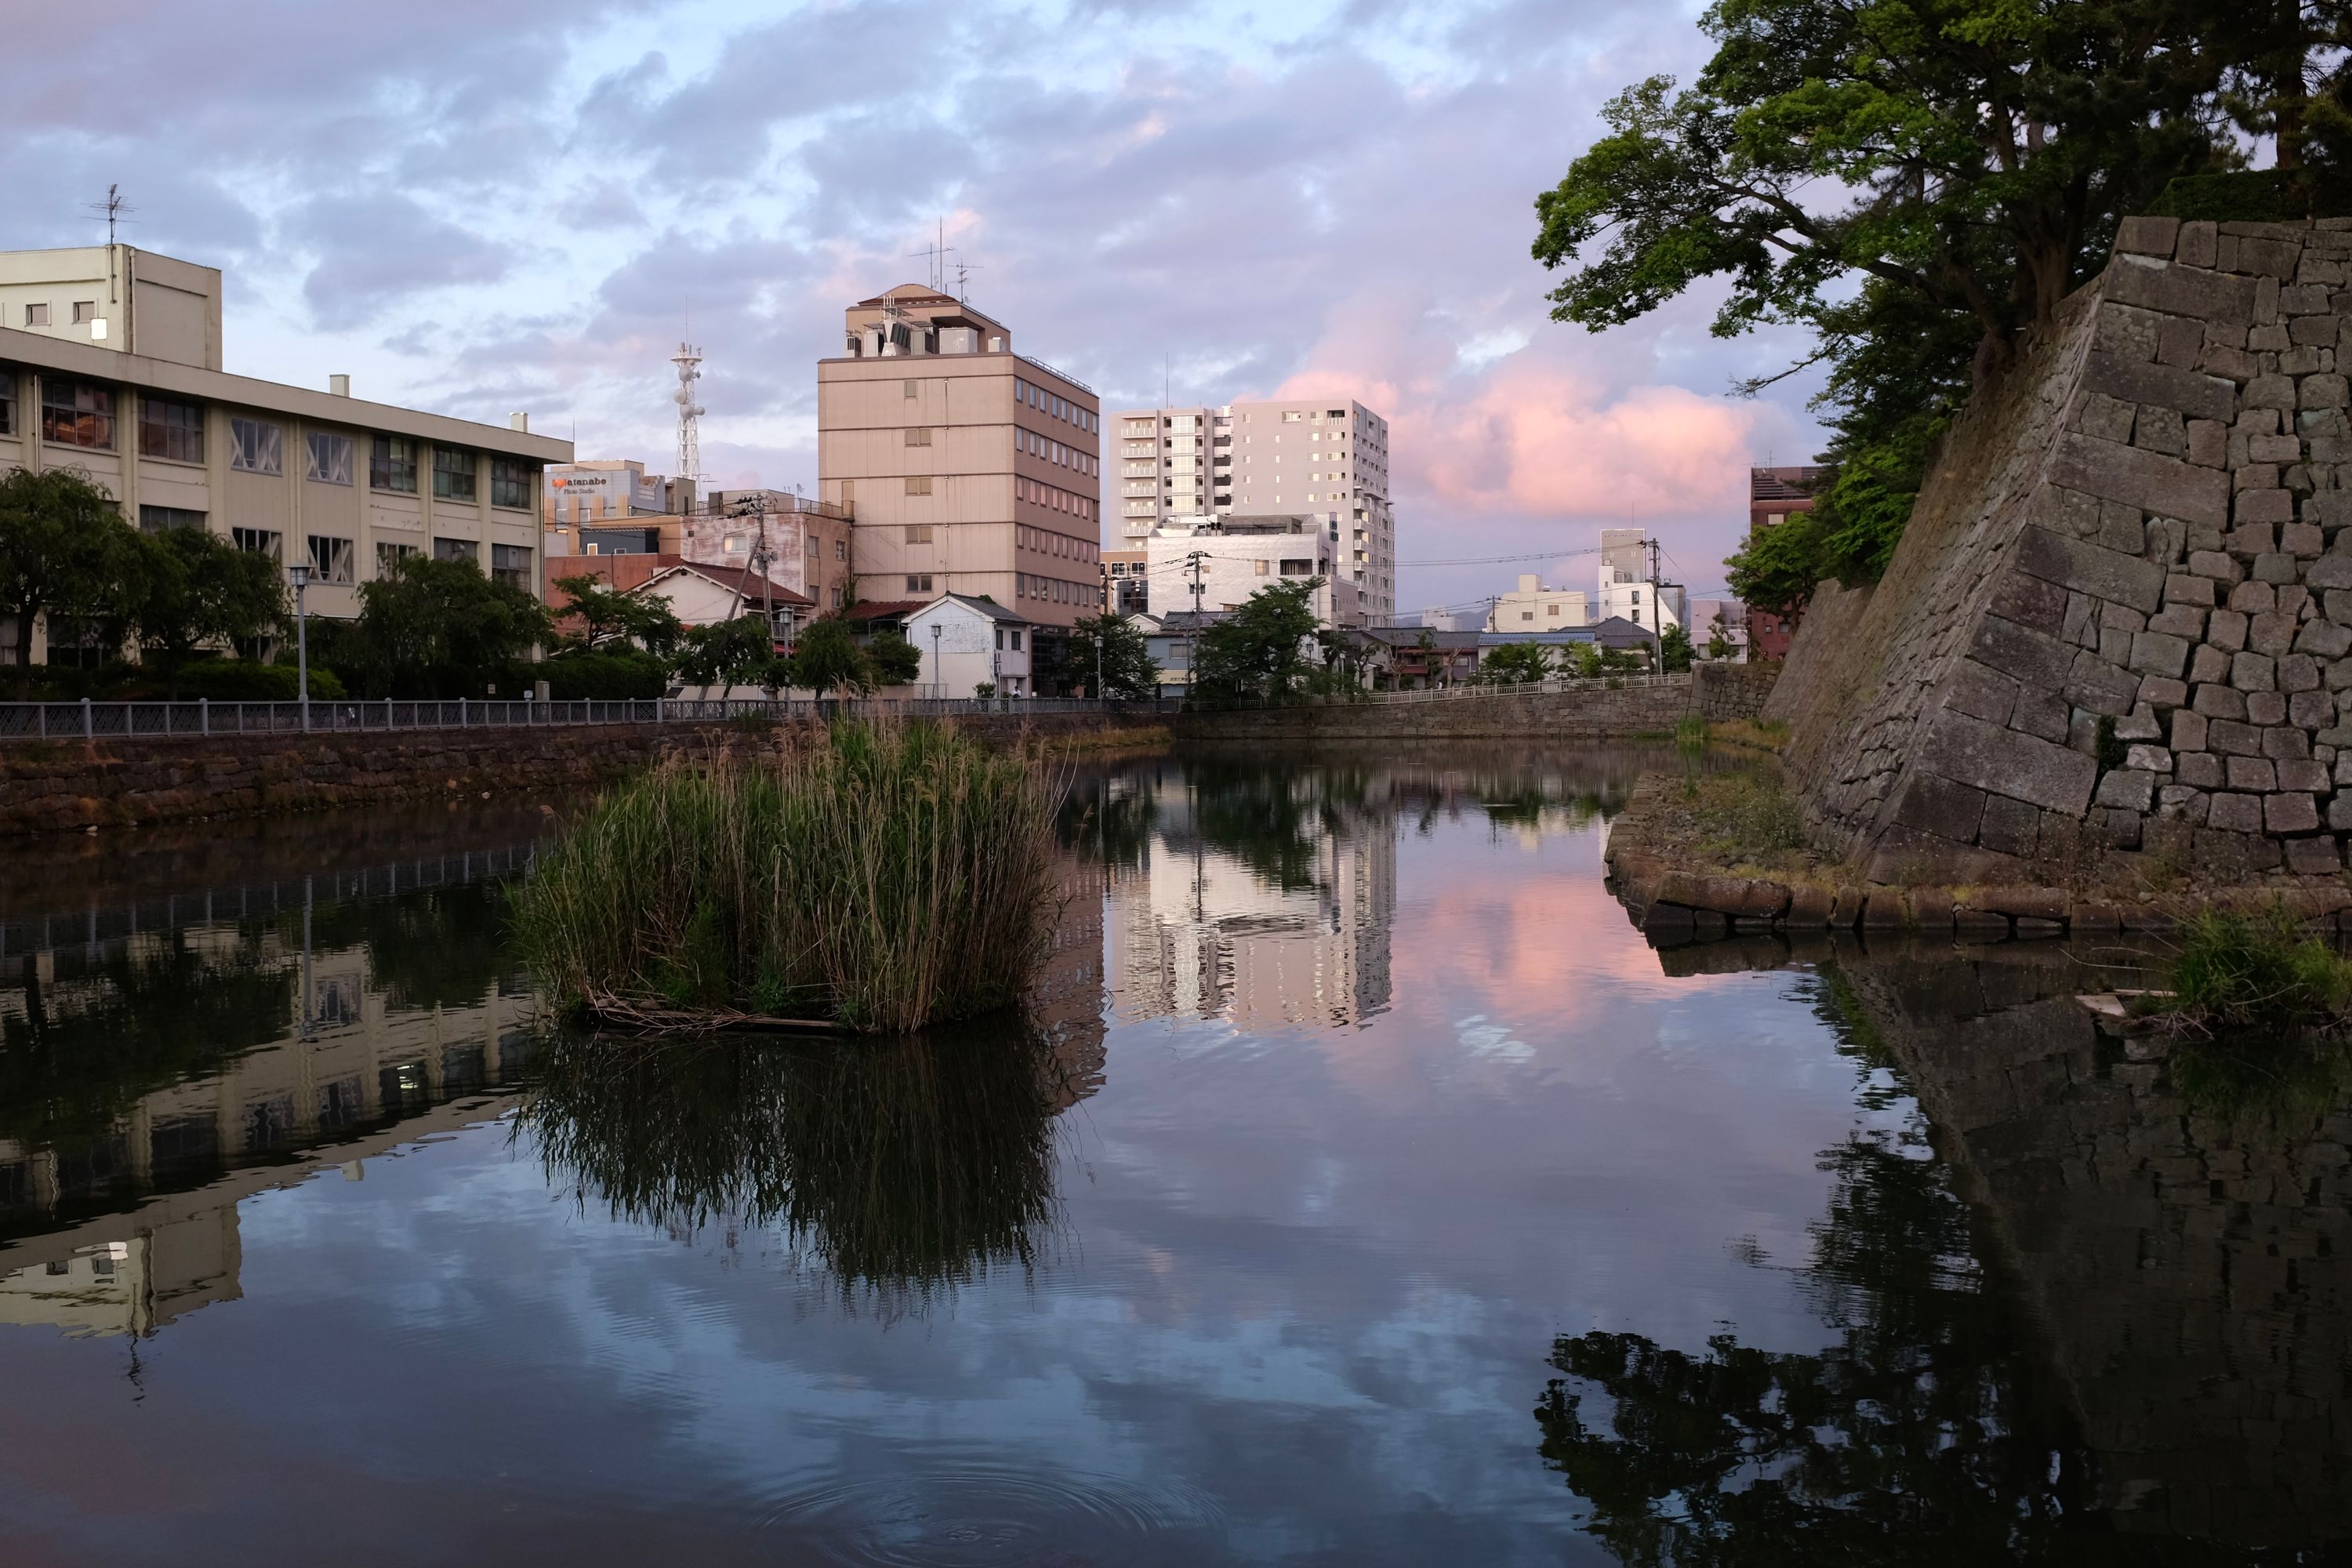 Modern buildings reflected in the water of the moat of a Japanese castle.